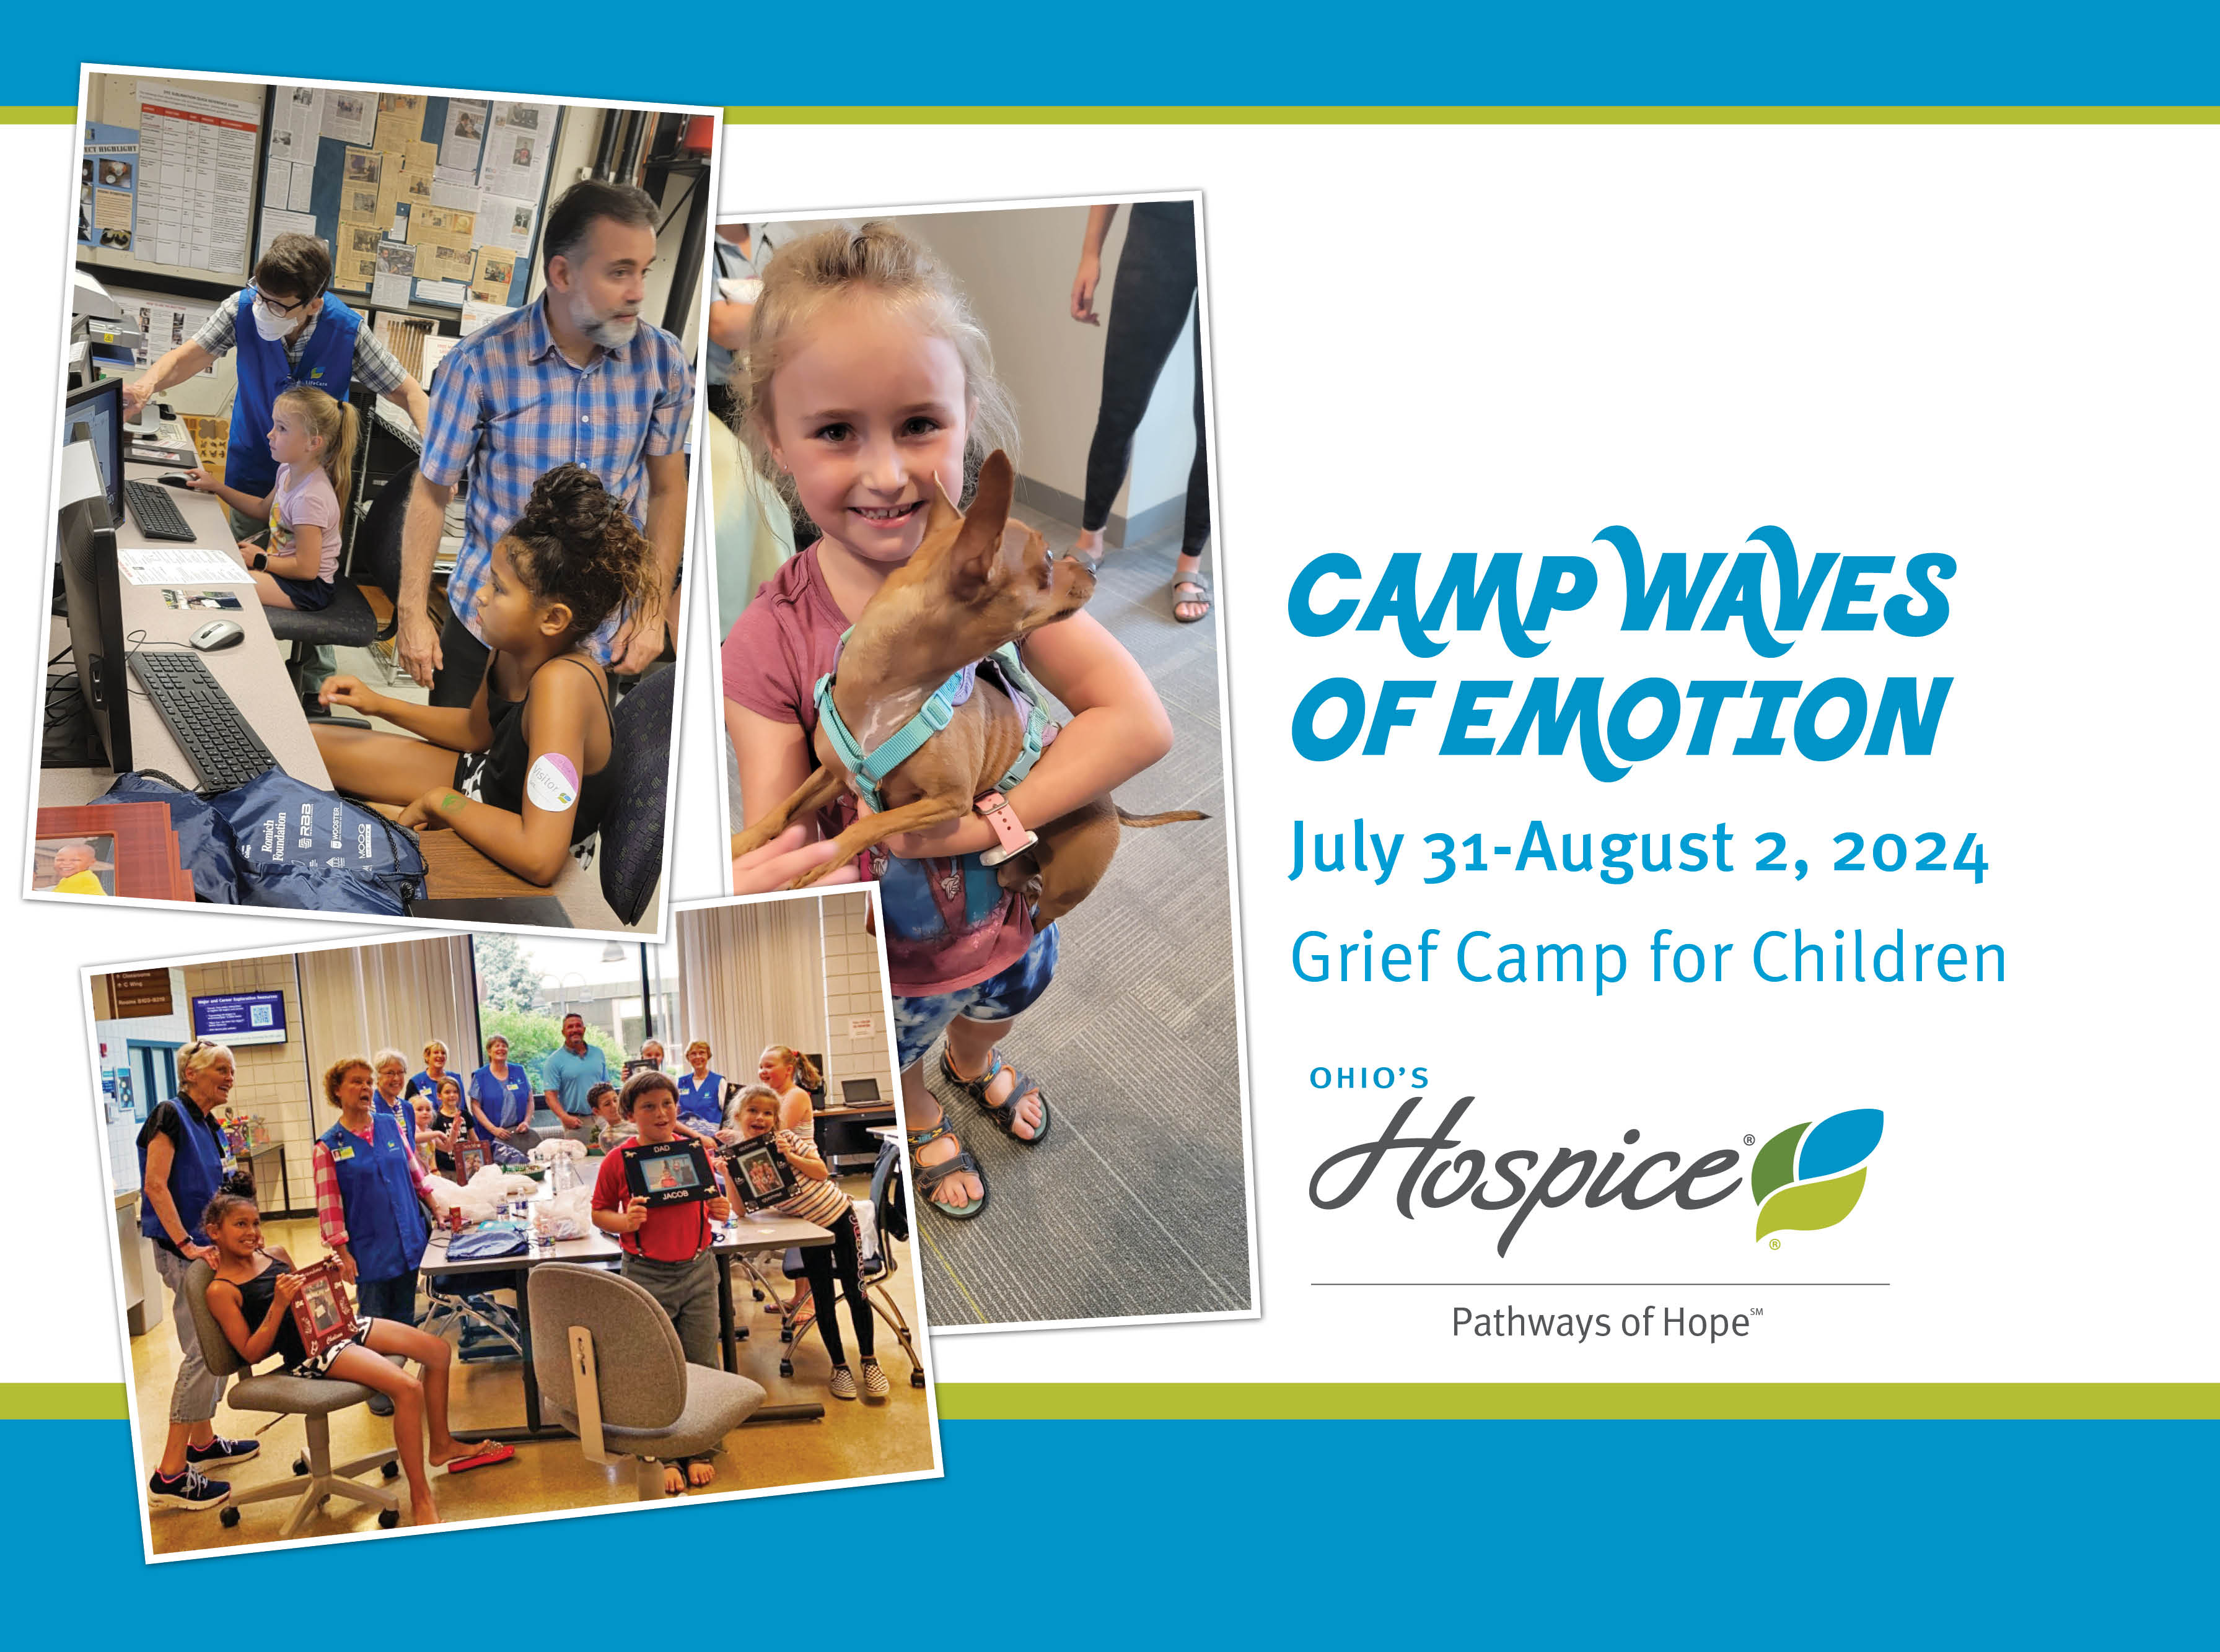 Camp Waves of Emotion July 31-August 2, 2024